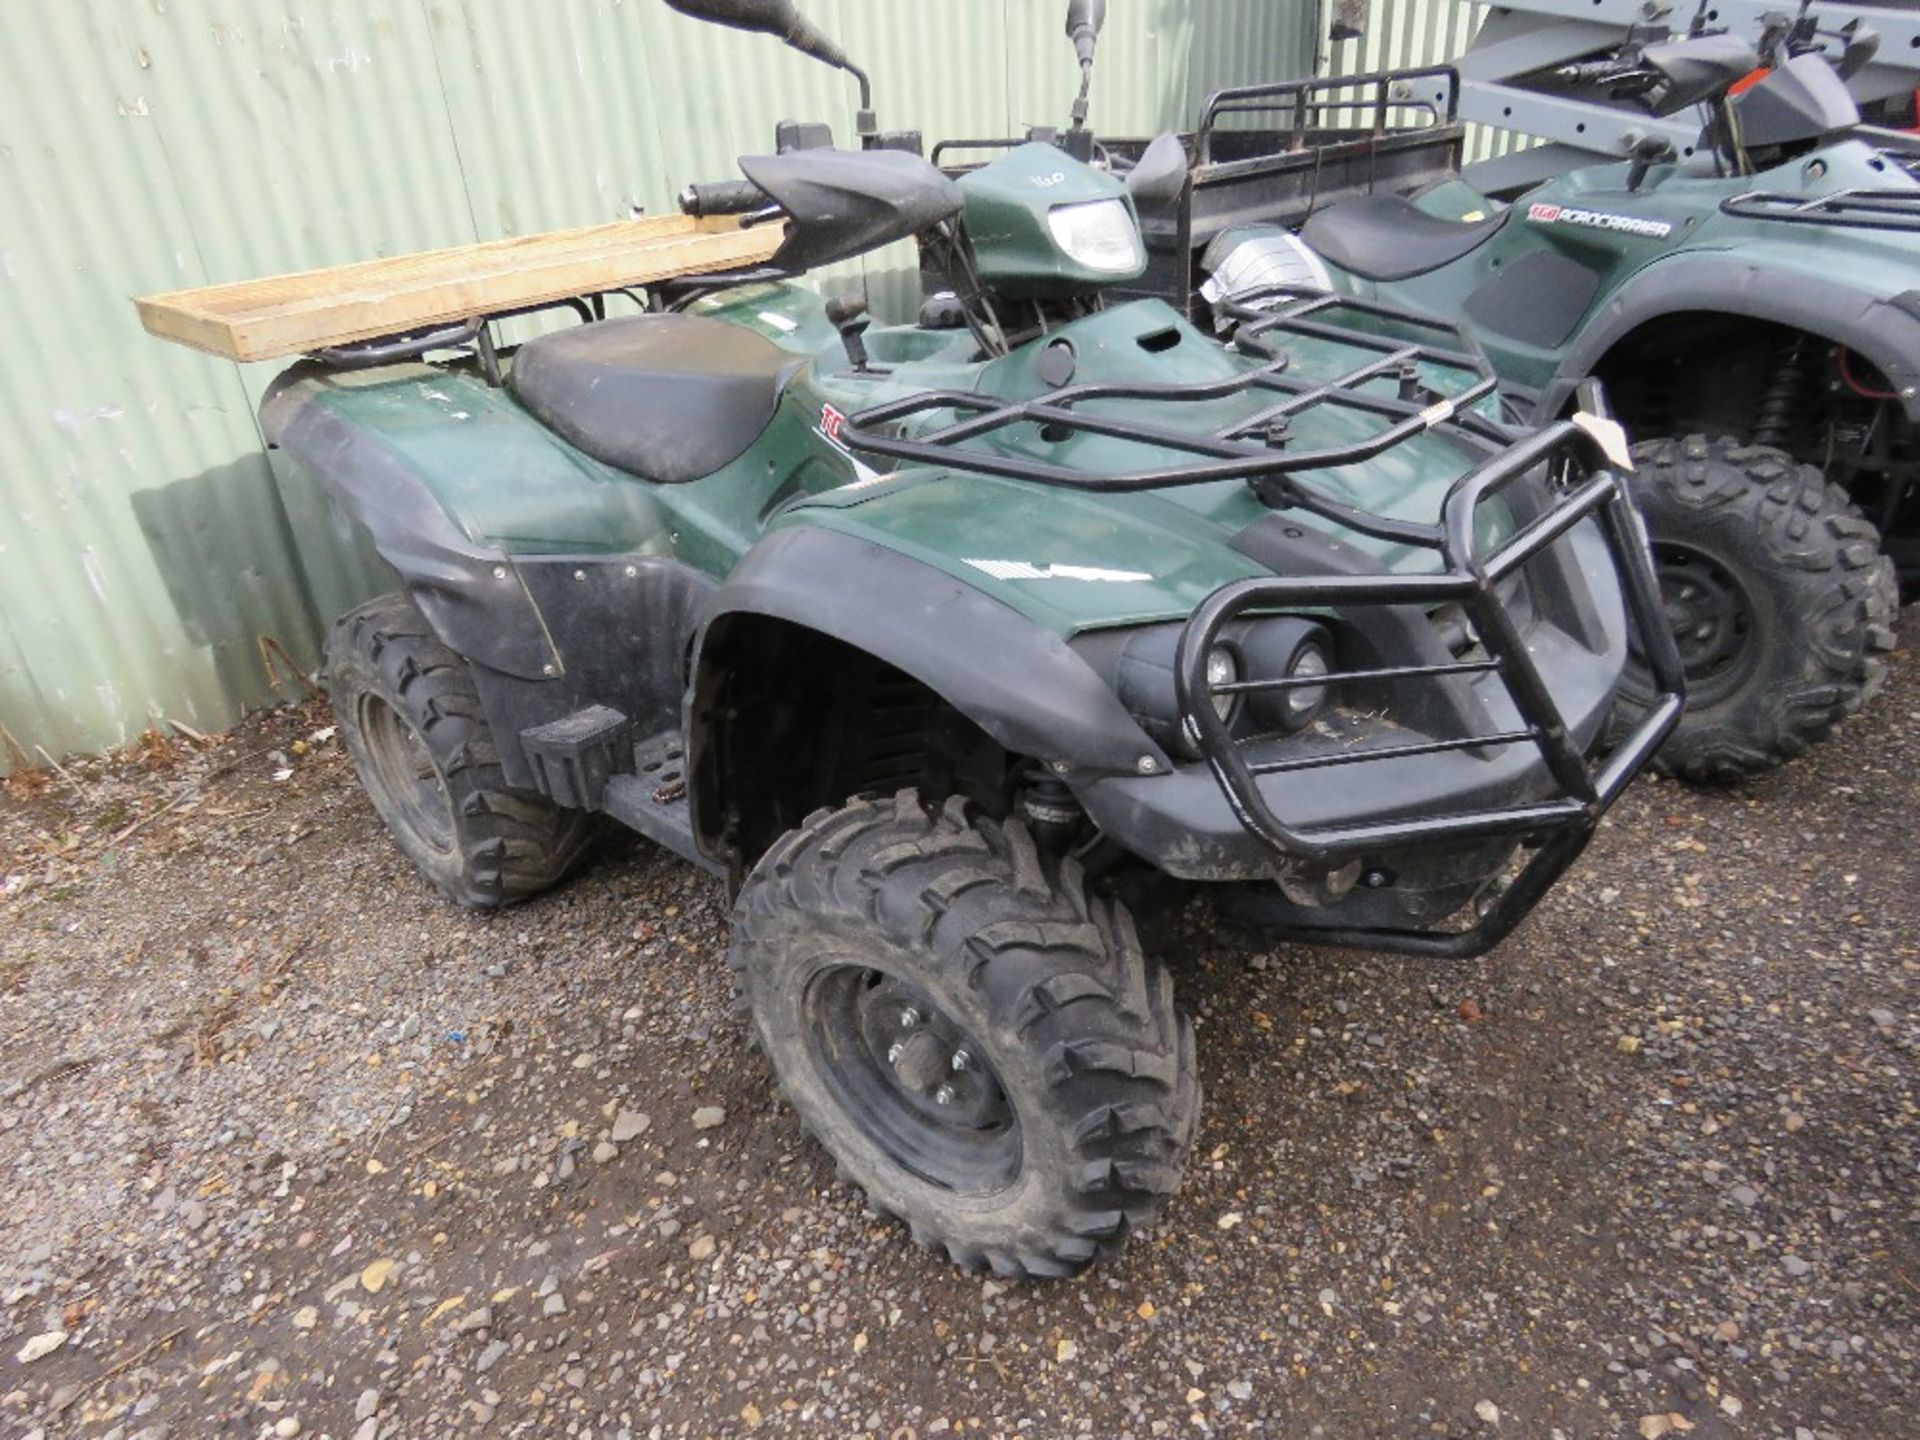 TGB 550 4WD QUAD BIKE, 2547 REC MILES, SUPPLIED NEW IN MAY 2018. WHEN TESTED WAS SEEN TO DRIVE, STE